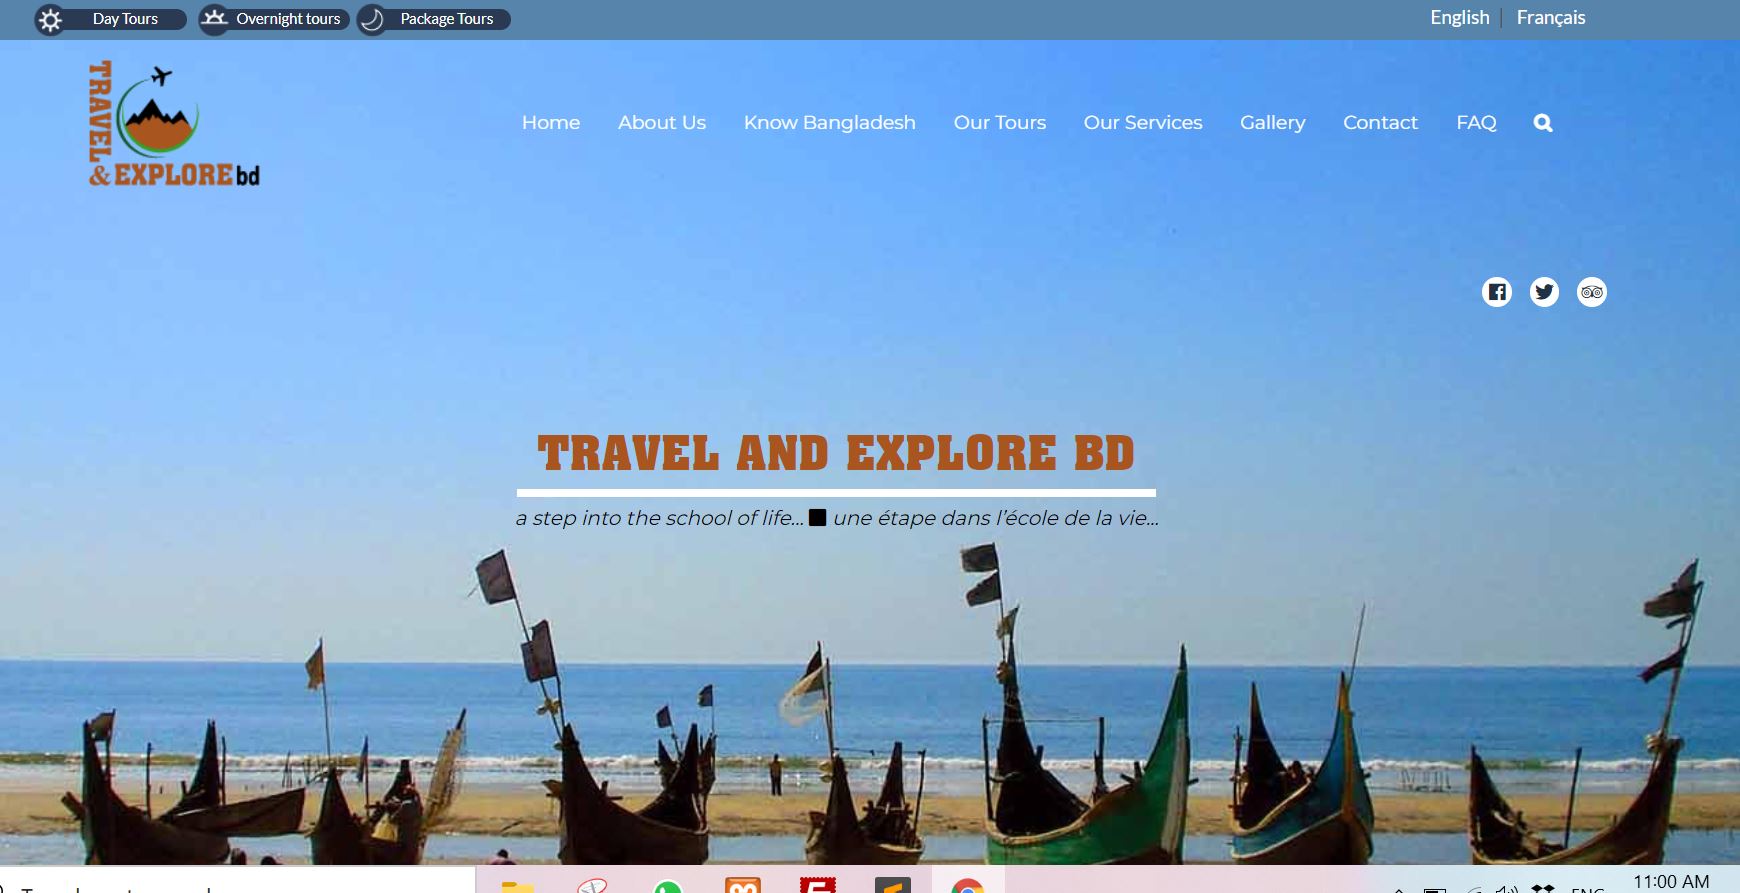 TRAVEL AND EXPLORE BD